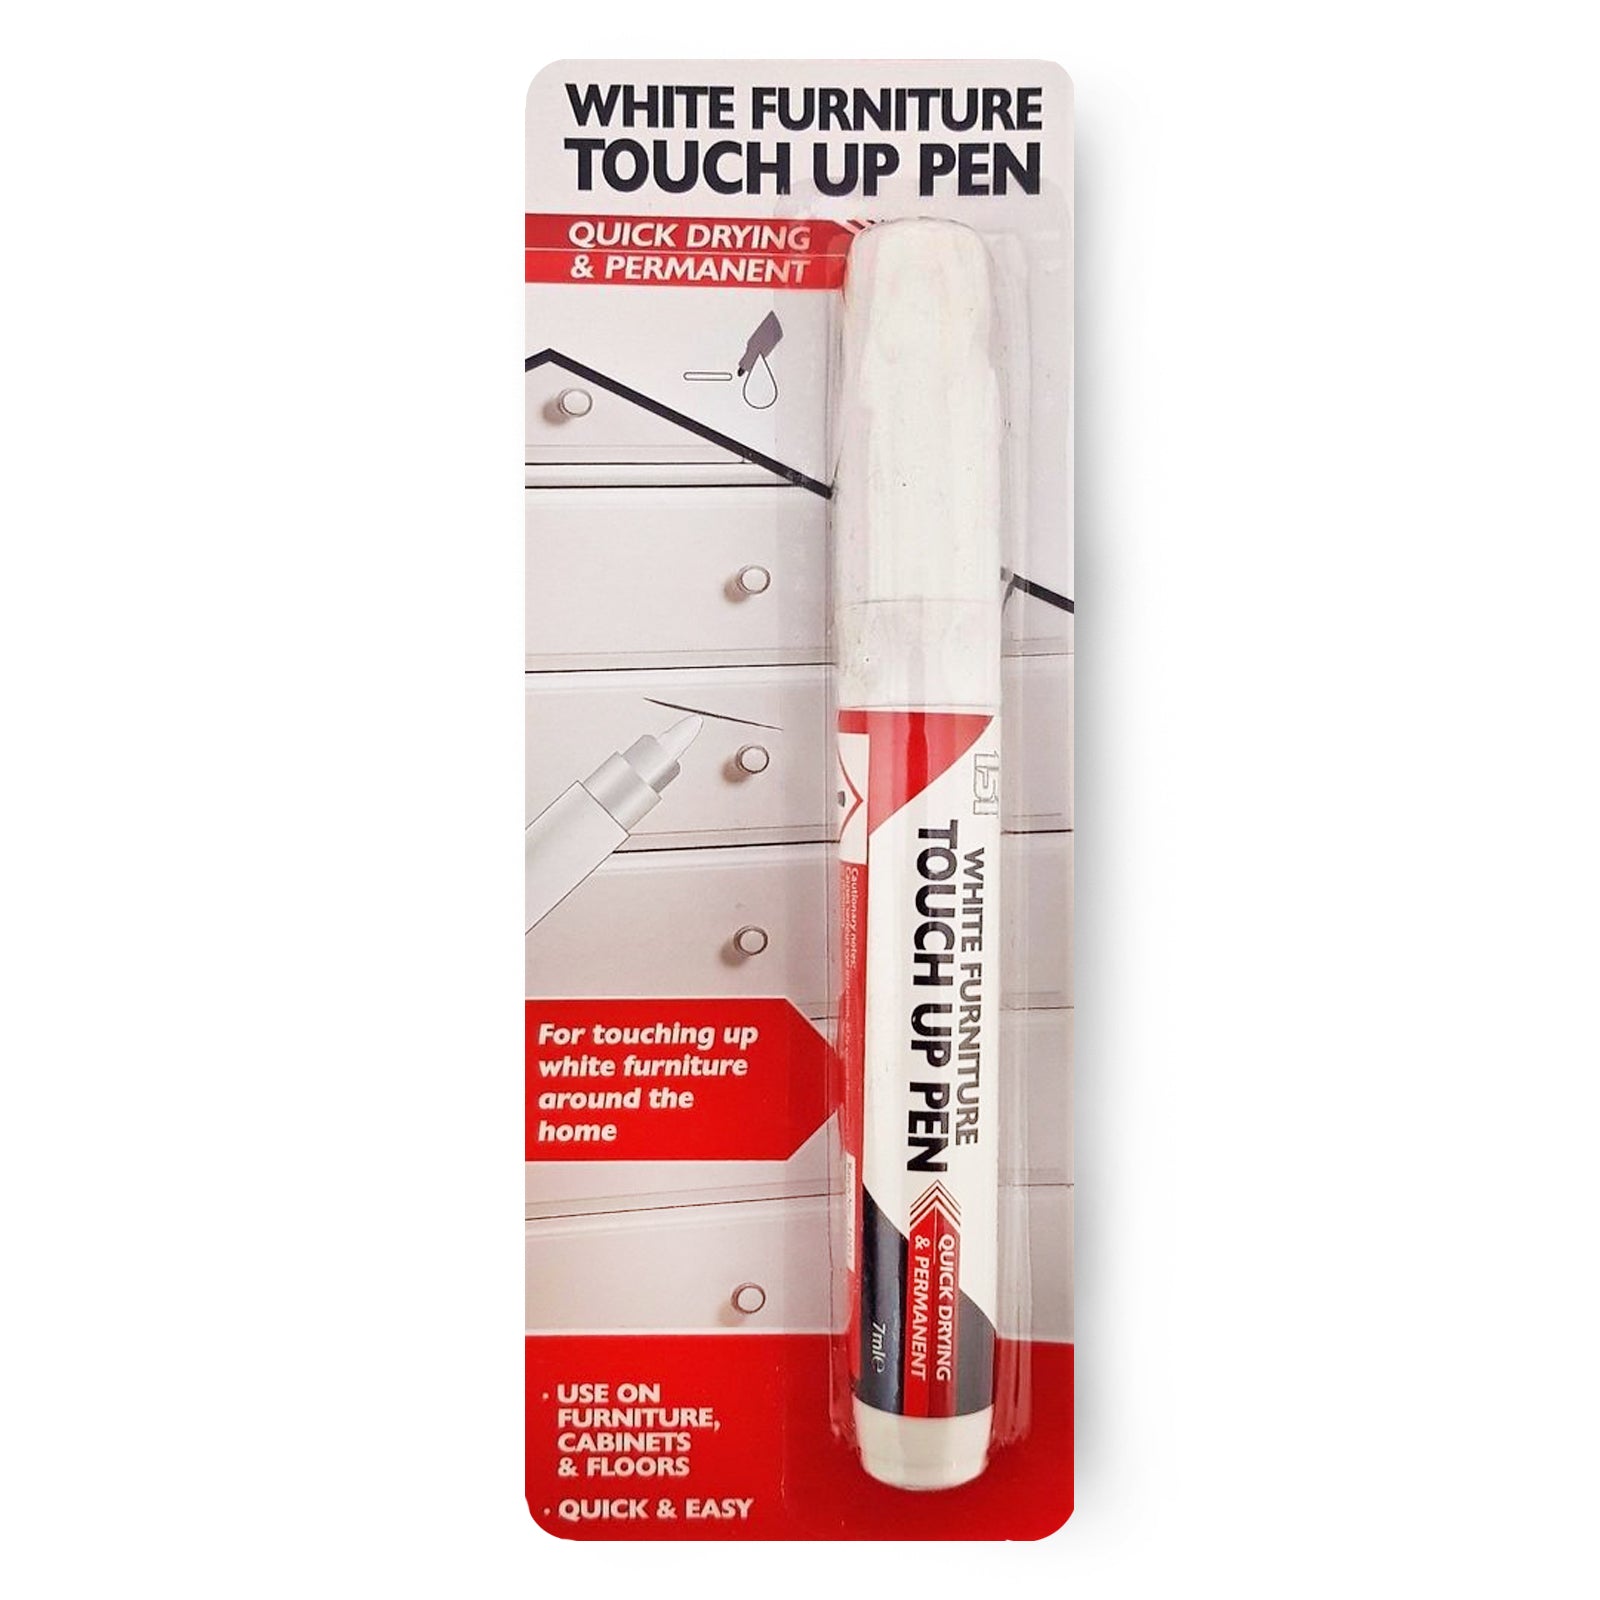 White Furniture Touch Up Pen – Yorkshire Trading Company